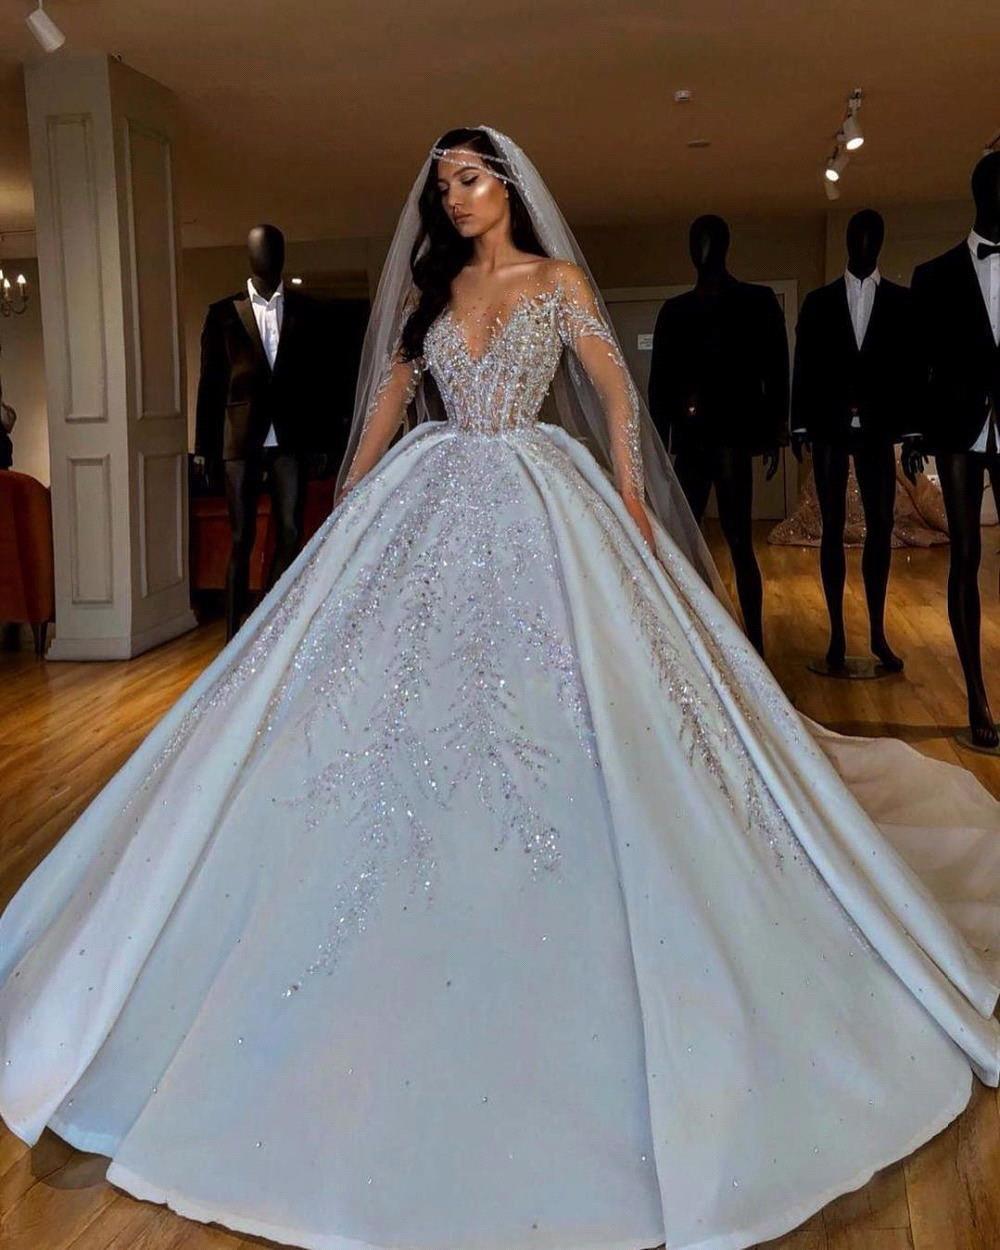 wedding dress ball gown with long train